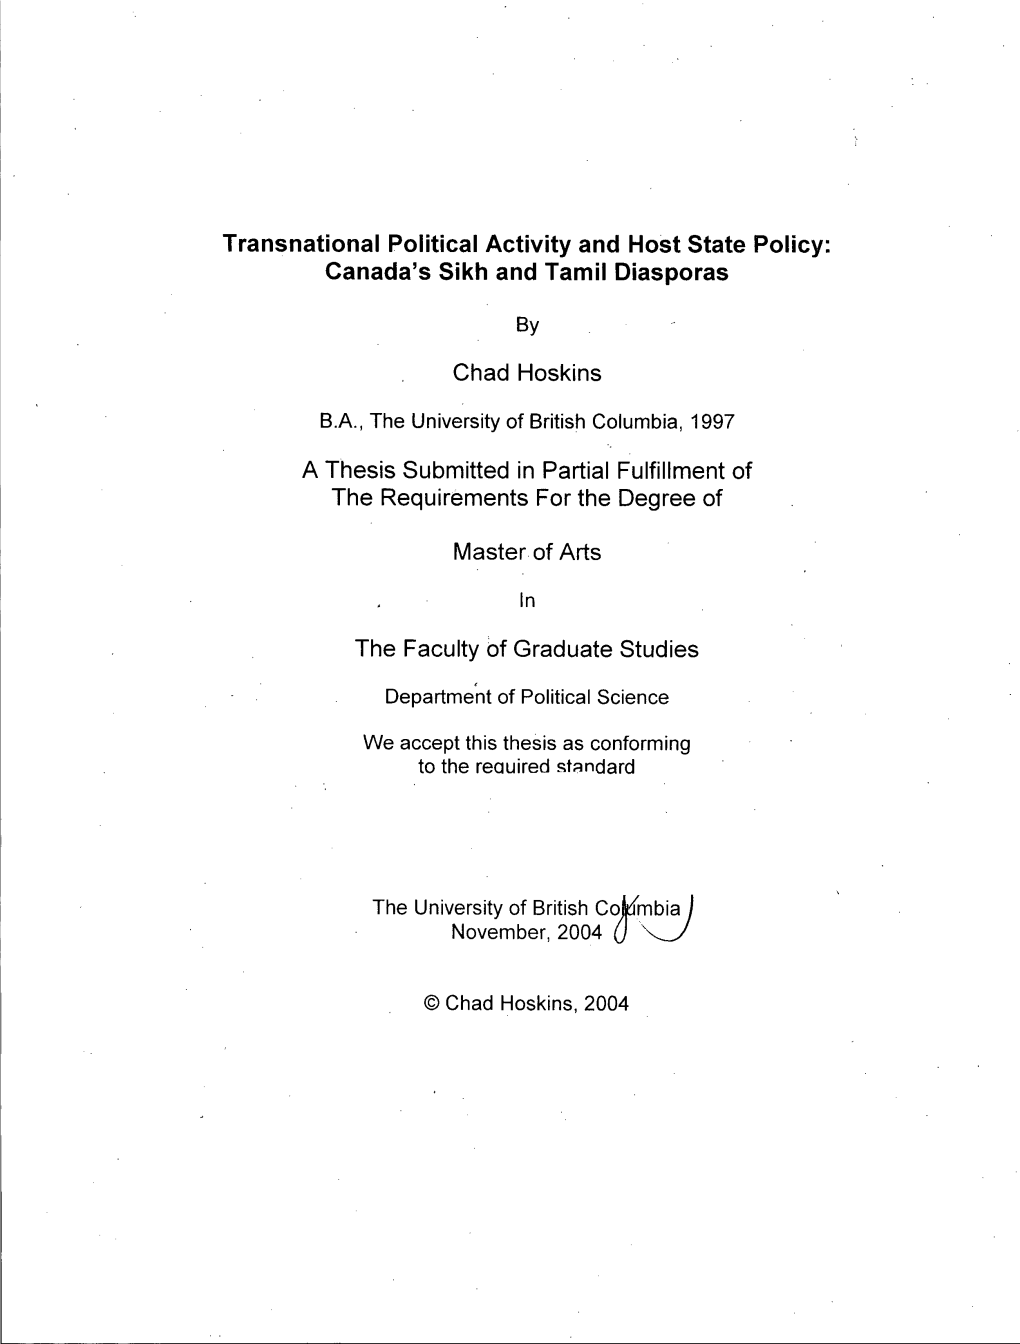 Transnational Political Activity and Host State Policy: Canada's Sikh and Tamil Diasporas Chad Hoskins a Thesis Submitted In